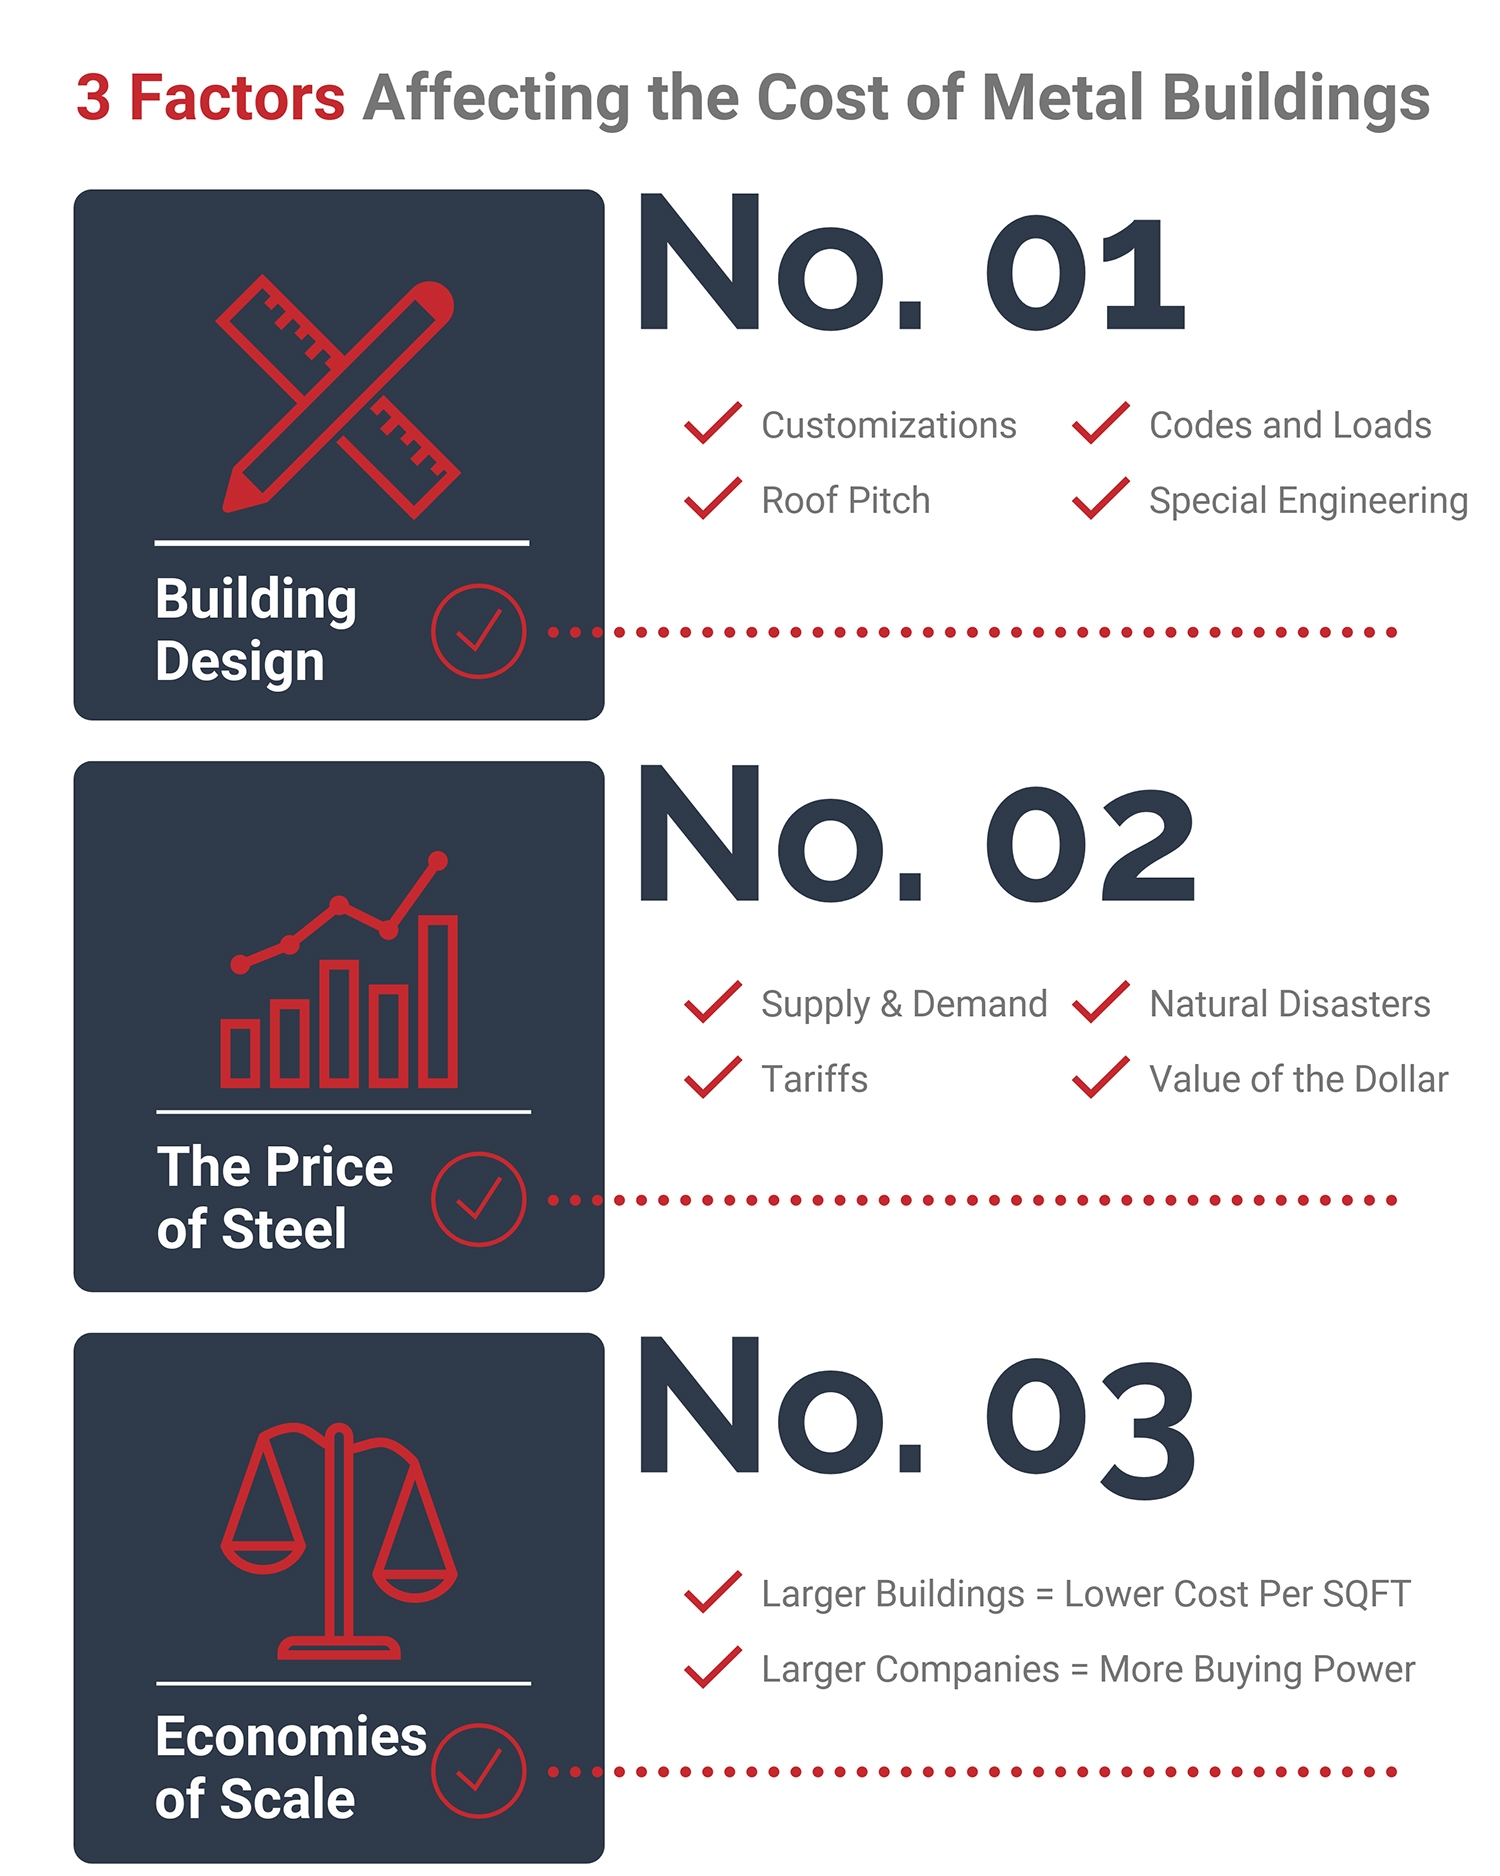 Metal Building Cost 101: How Much Does a Steel Building Cost?